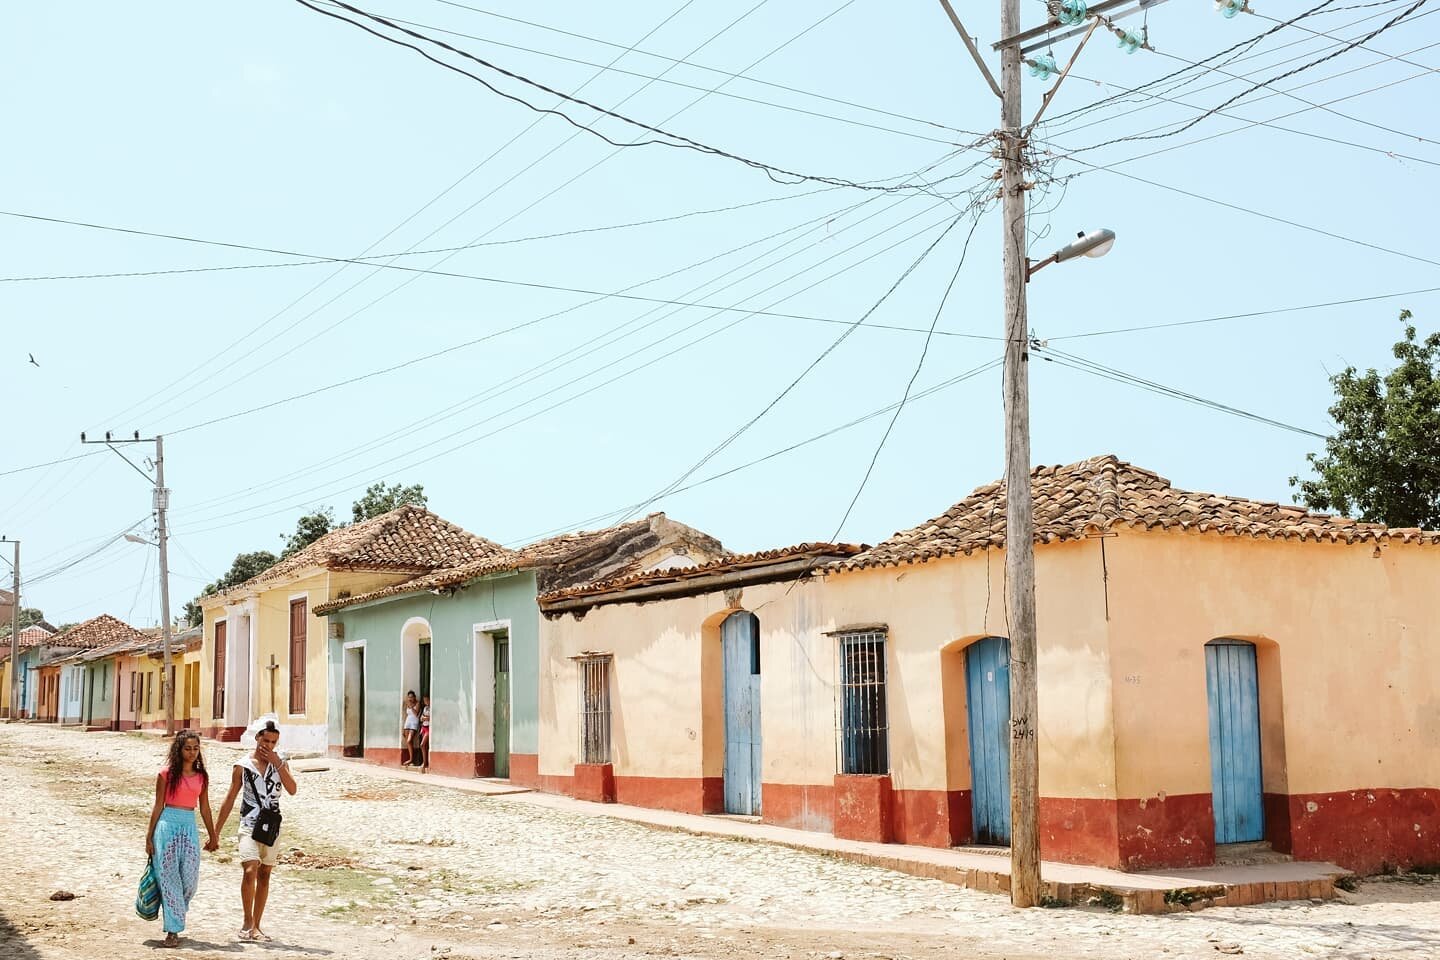 Wanderlust kicking in pretty bad at the moment, throwback to the beautiful, colourful people and streets of Trinidad, Cuba.